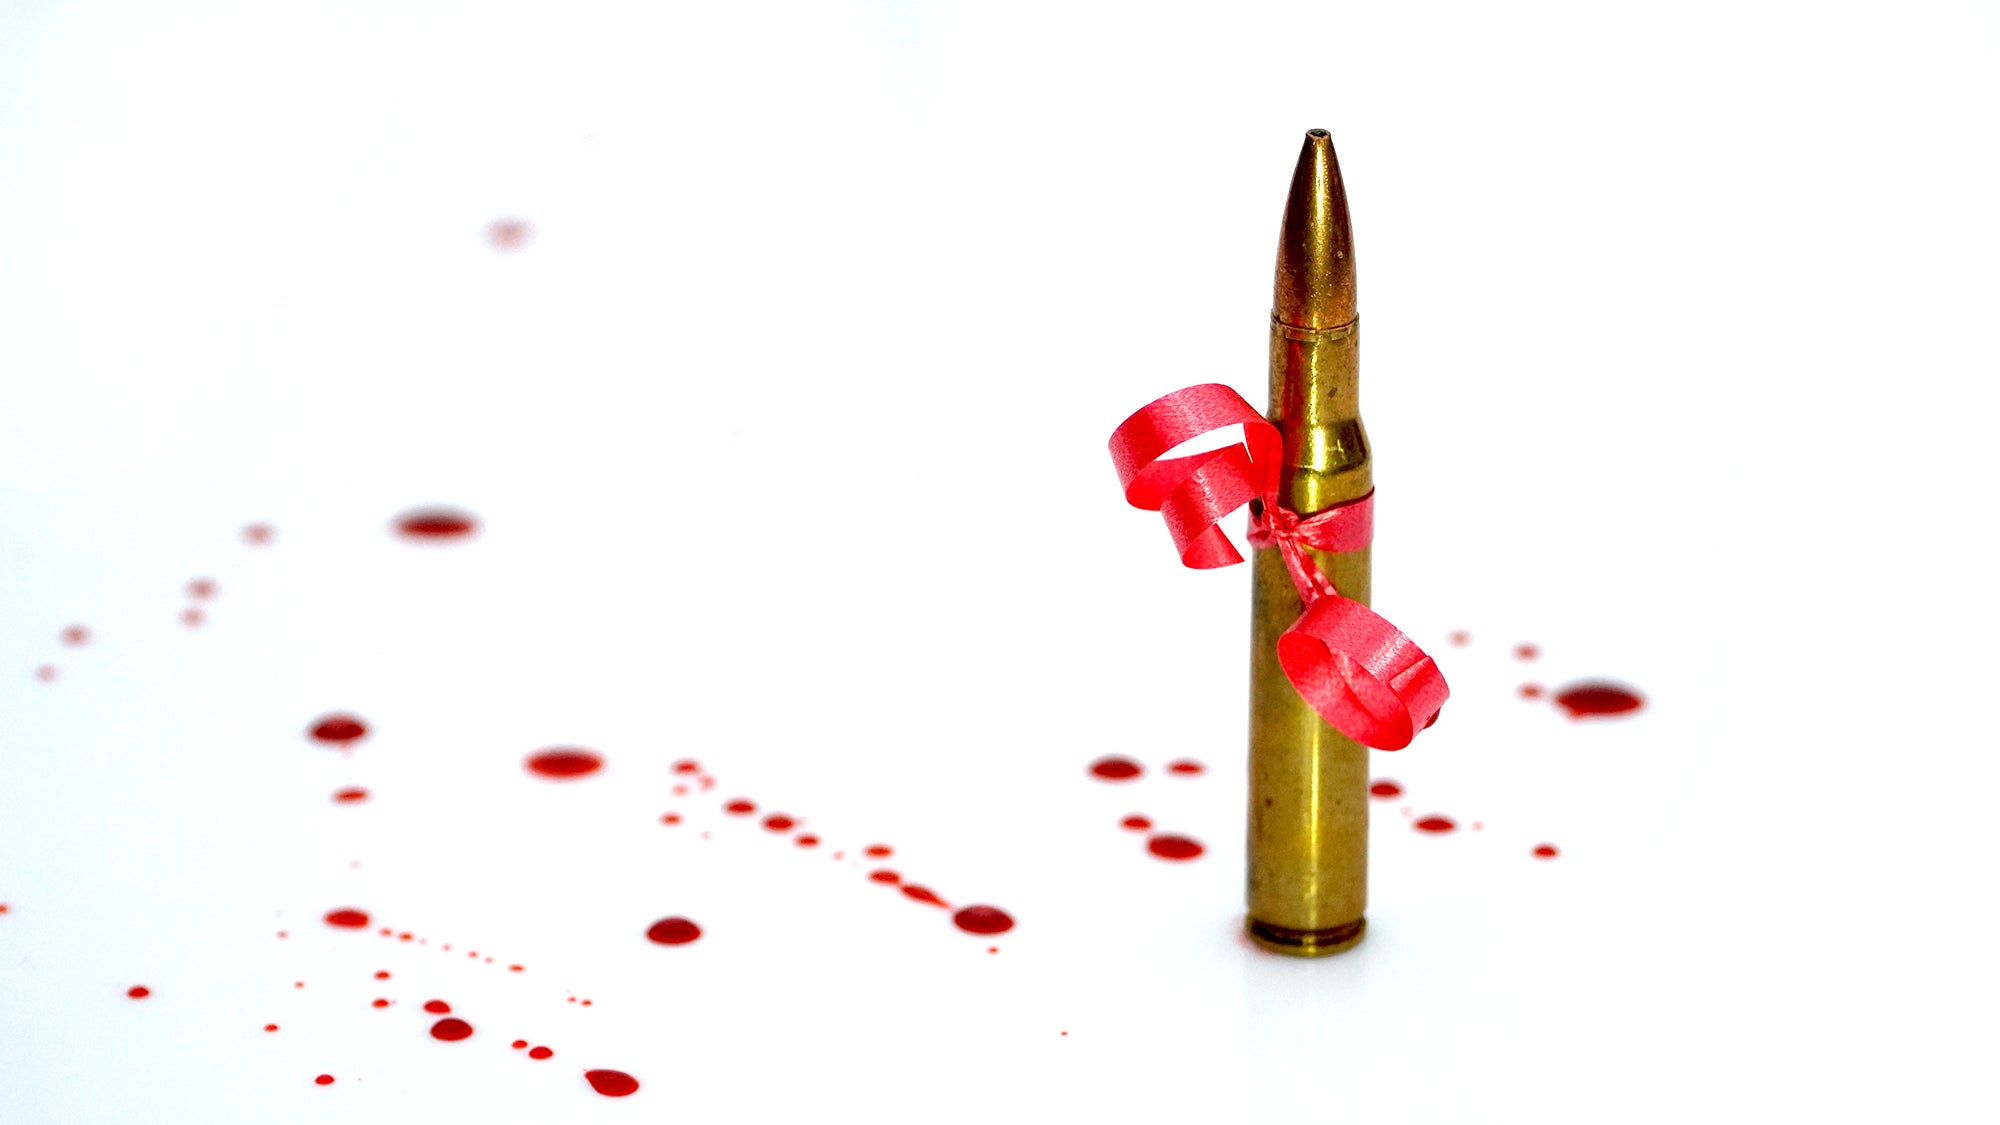 A 30-06 bullet with a red ribbon and spots of blood on a white background